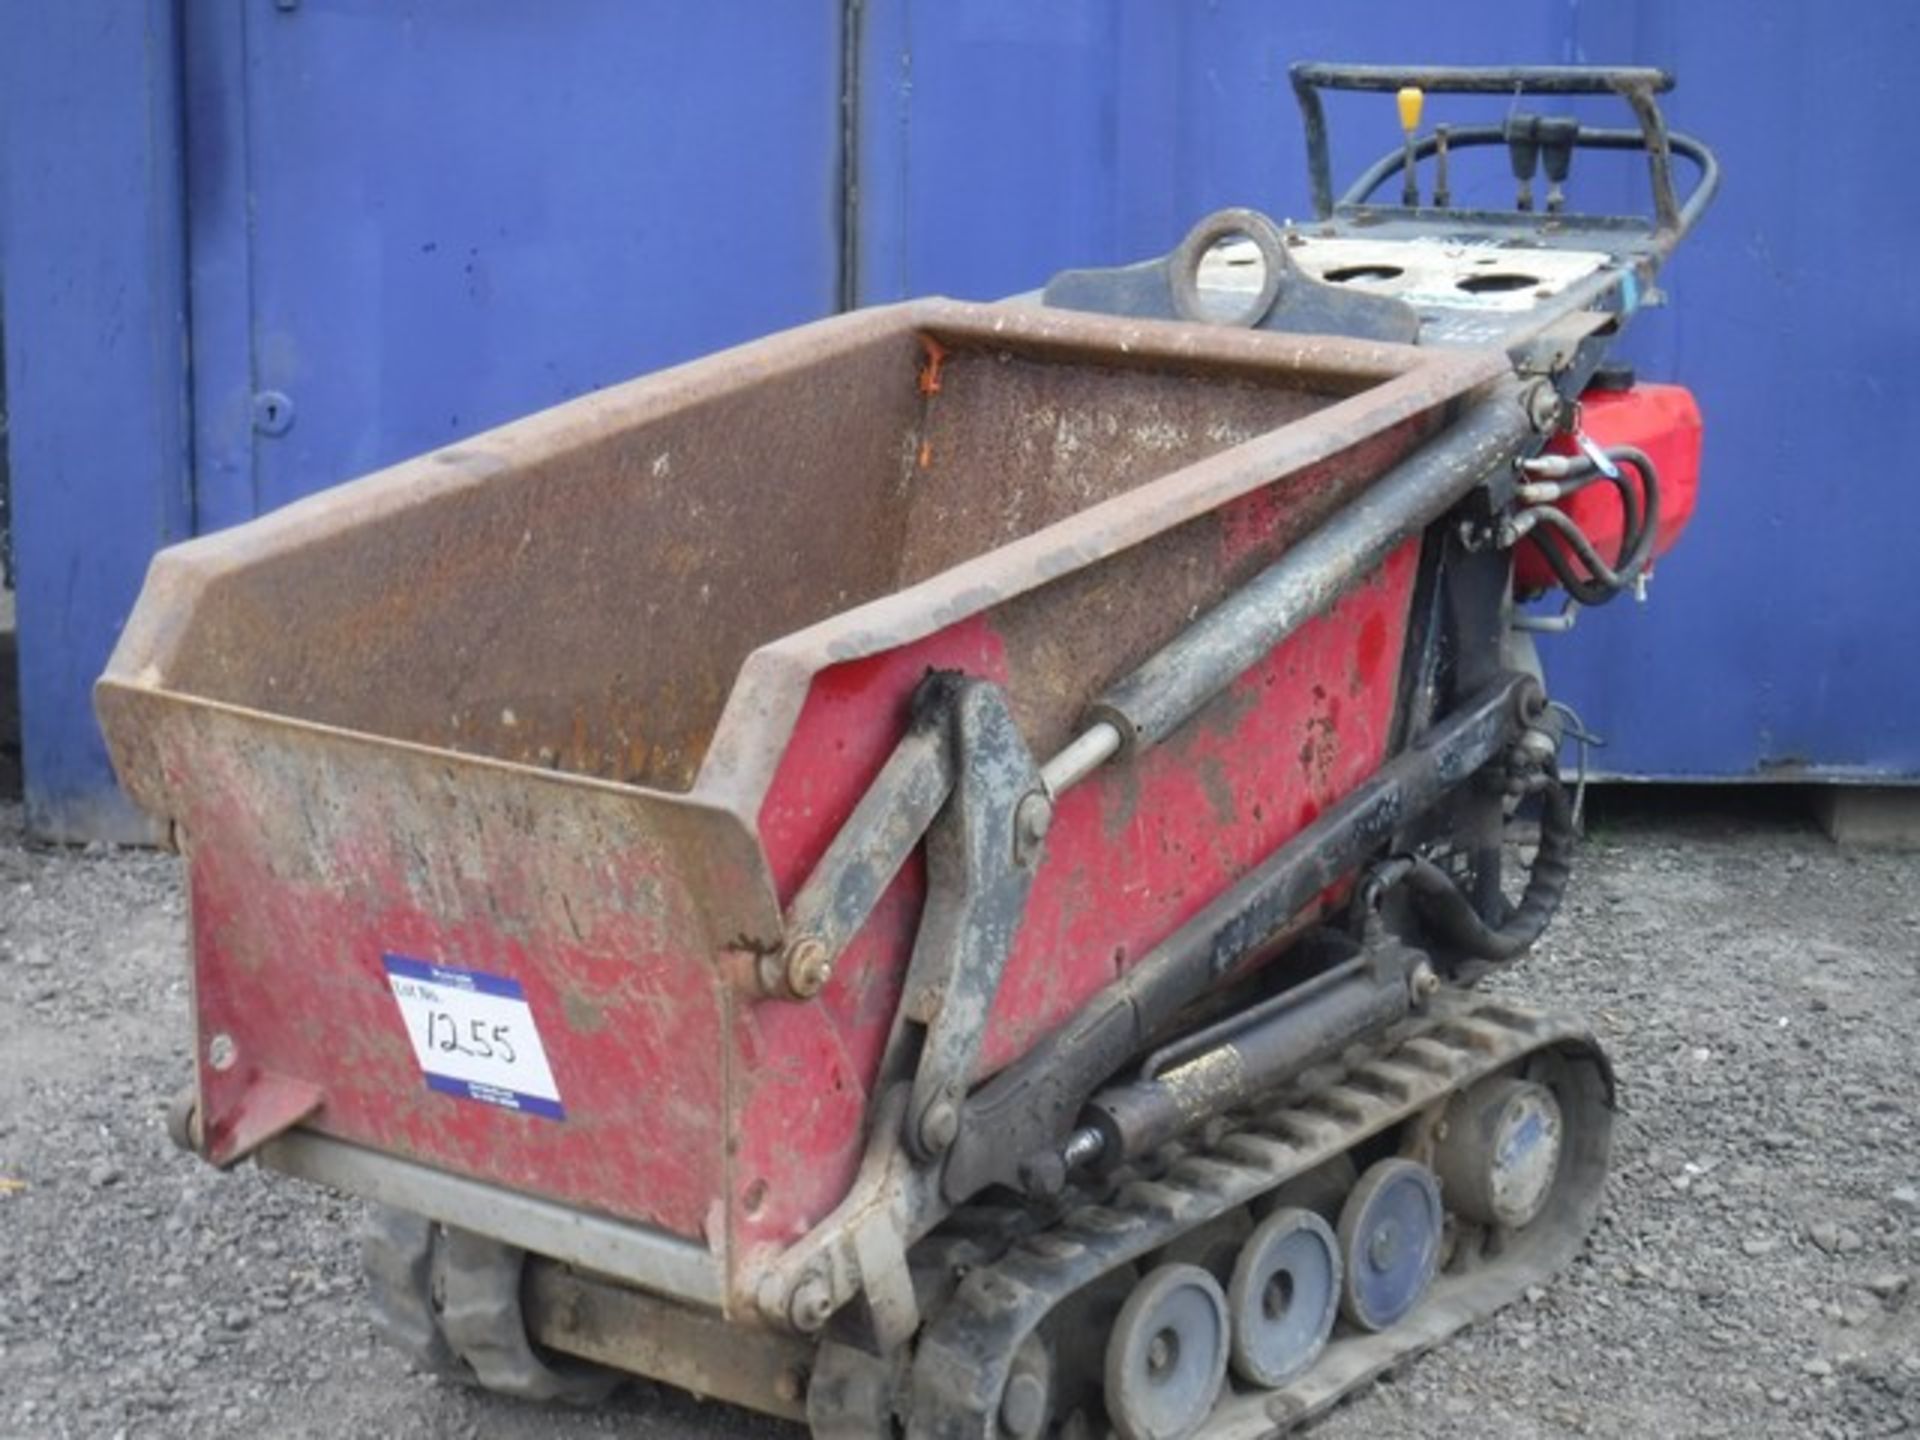 TCP HI- T500 HIGH TIP DIESEL POWER TRACK BARROW WITH KUBOTA ENGINE 2004 WITH 2380.7 HOURS SN- 81995